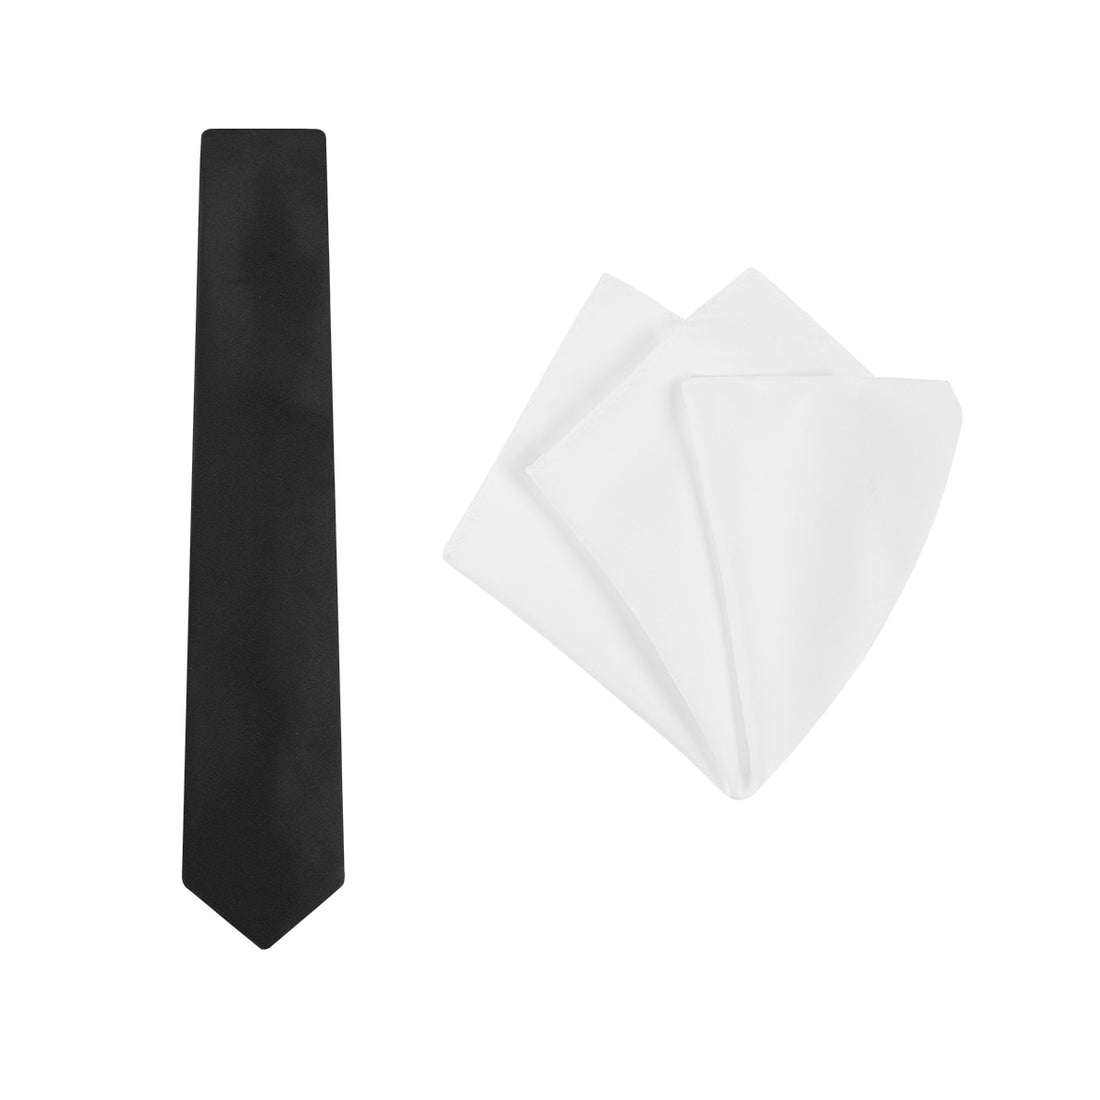 TIE + POCKET SQUARE SET. Plain. Black/White. Supplied with a white pocket square.-Ties-PEROZ Accessories